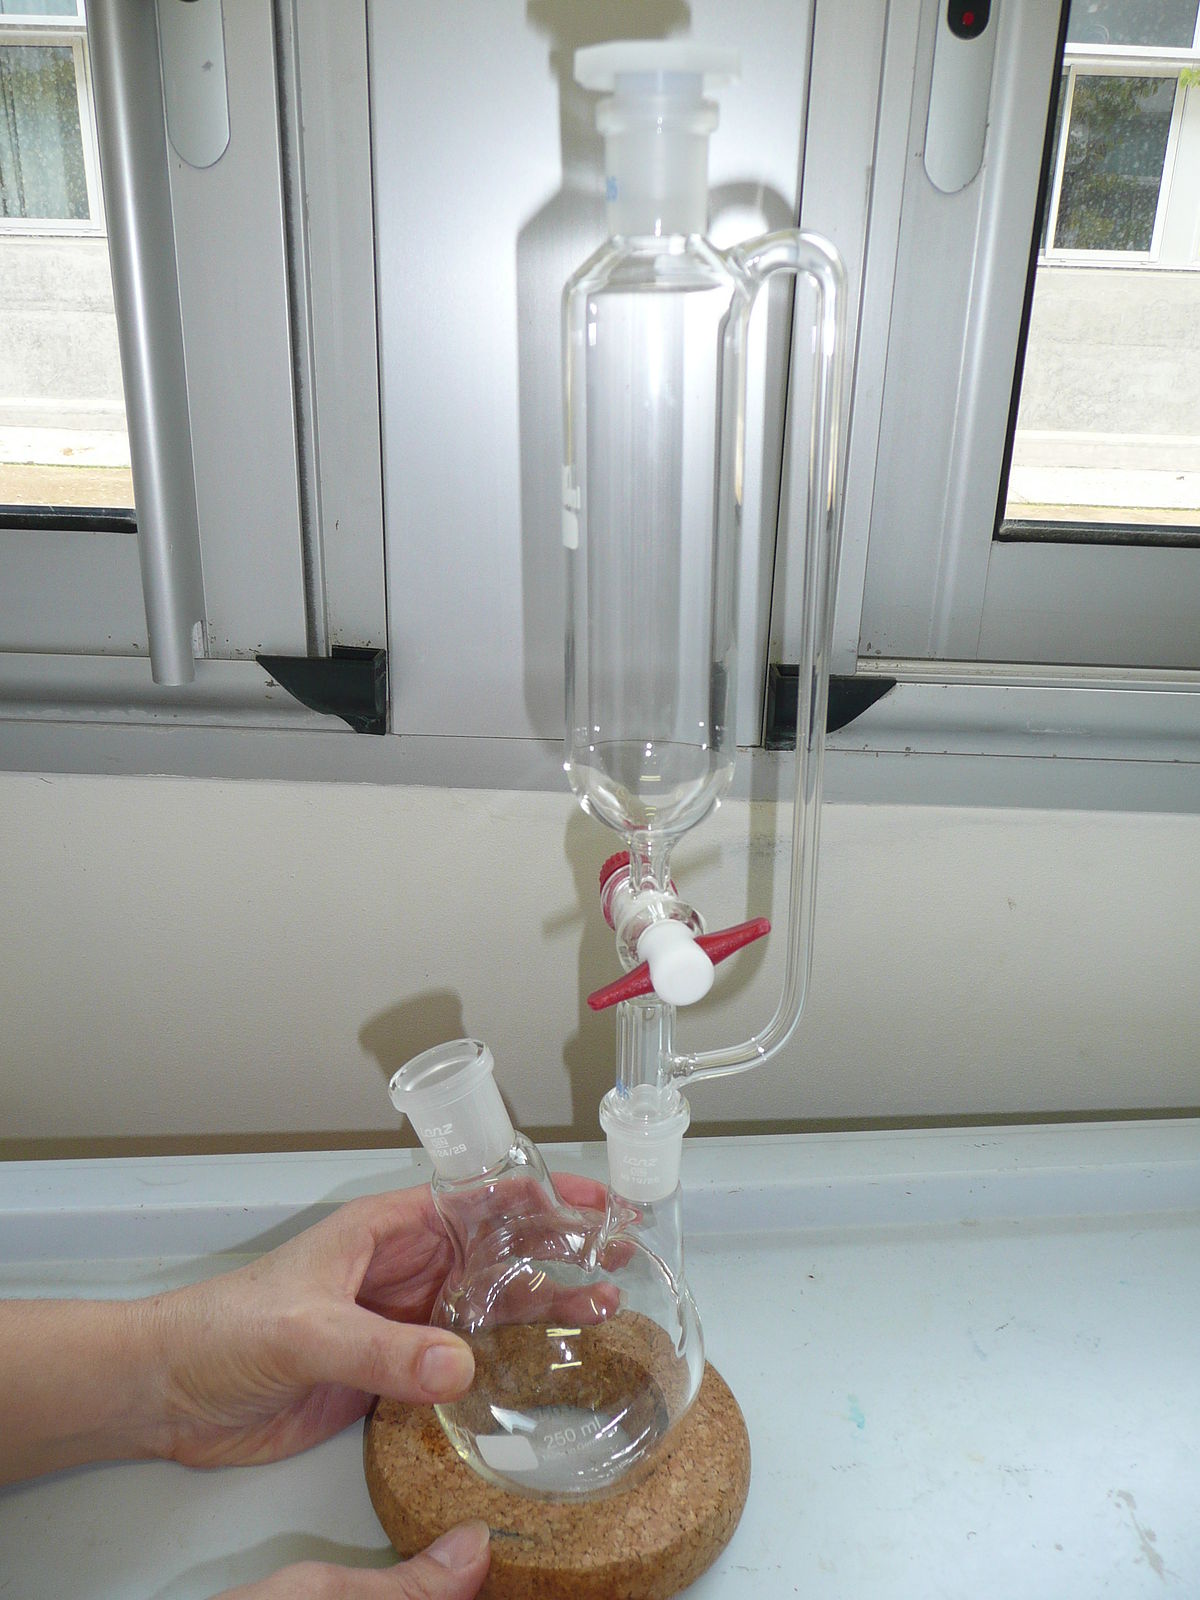 <p>Type of Funnel</p><p>Appearance - glass tube with a large cylindrical bulb in the middle, have a valve in the bottom, narrow at the bottom and have a wide opening at the top</p><p>Uses - transfer fluids, <em>used to add or drop liquids</em> to a reaction mixture, useful for adding reagents slowly</p><ul><li><p>stopcock (valve) allows the flow to be controlled</p></li><li><p>Pressure equalizing funnel, addition funnels</p></li><li><p>can be graduated or non-graduated</p></li></ul>